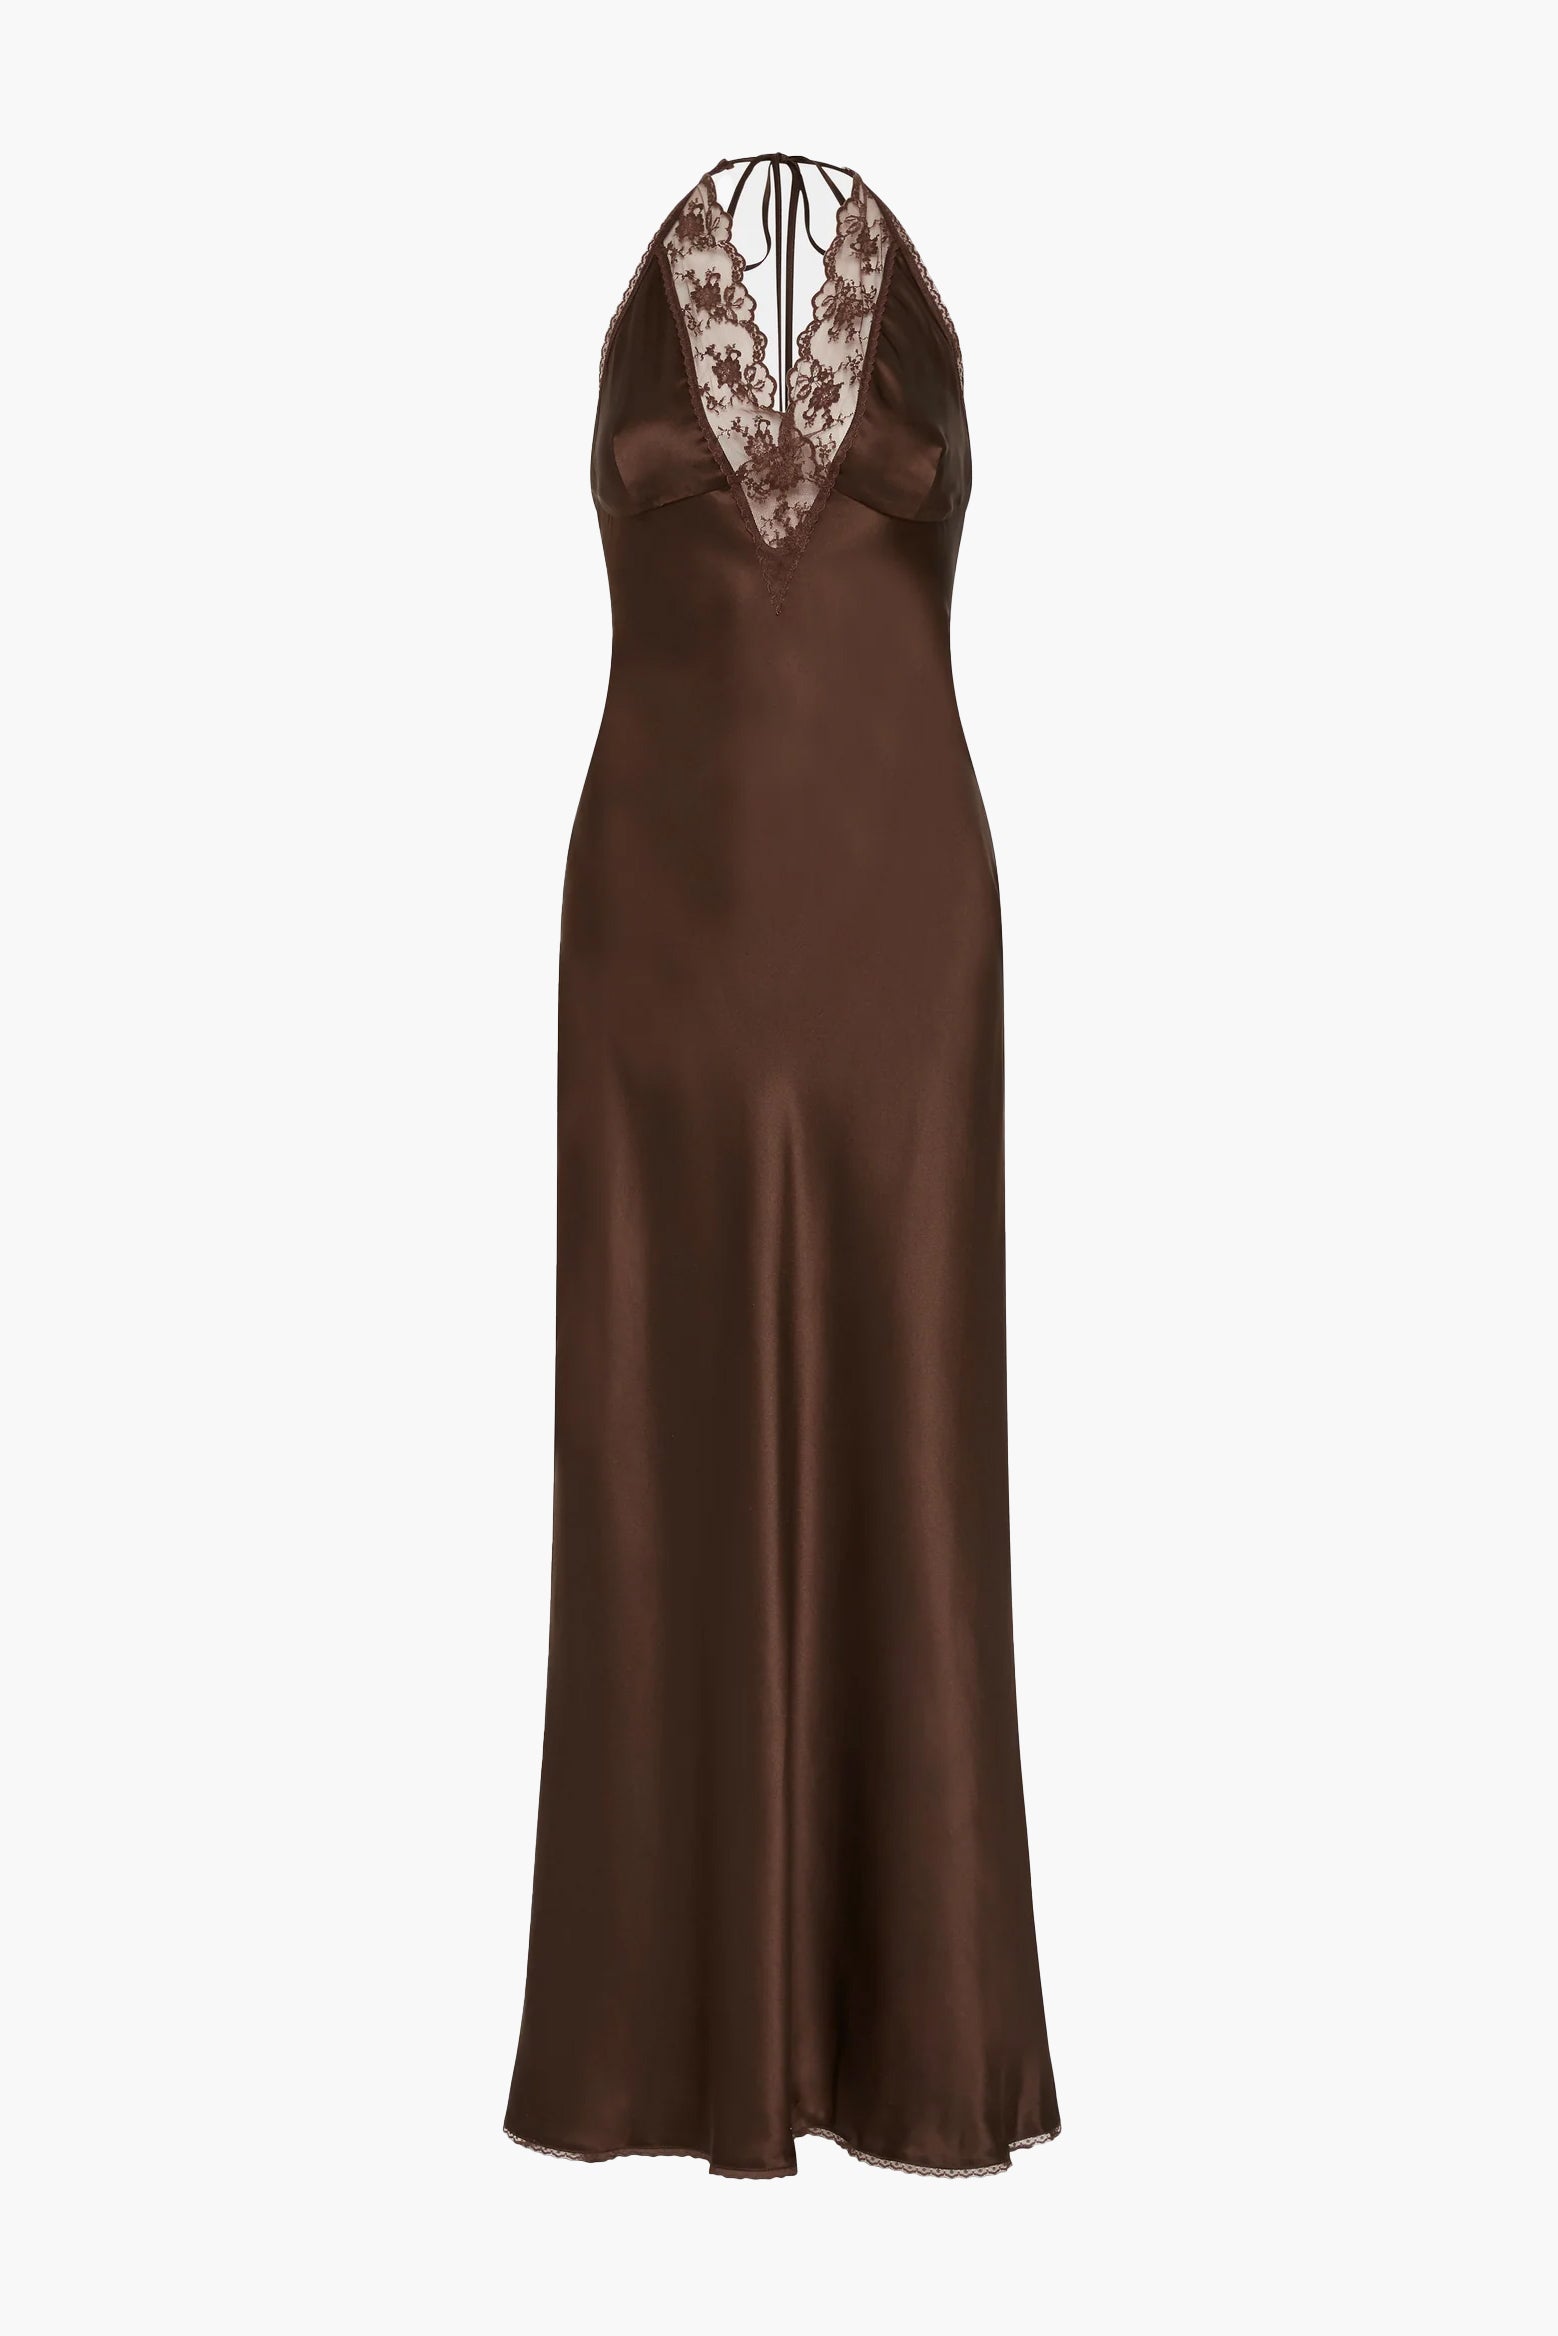 SIR Aries Halter Gown in Chocolate available at The New Trend Australia. 